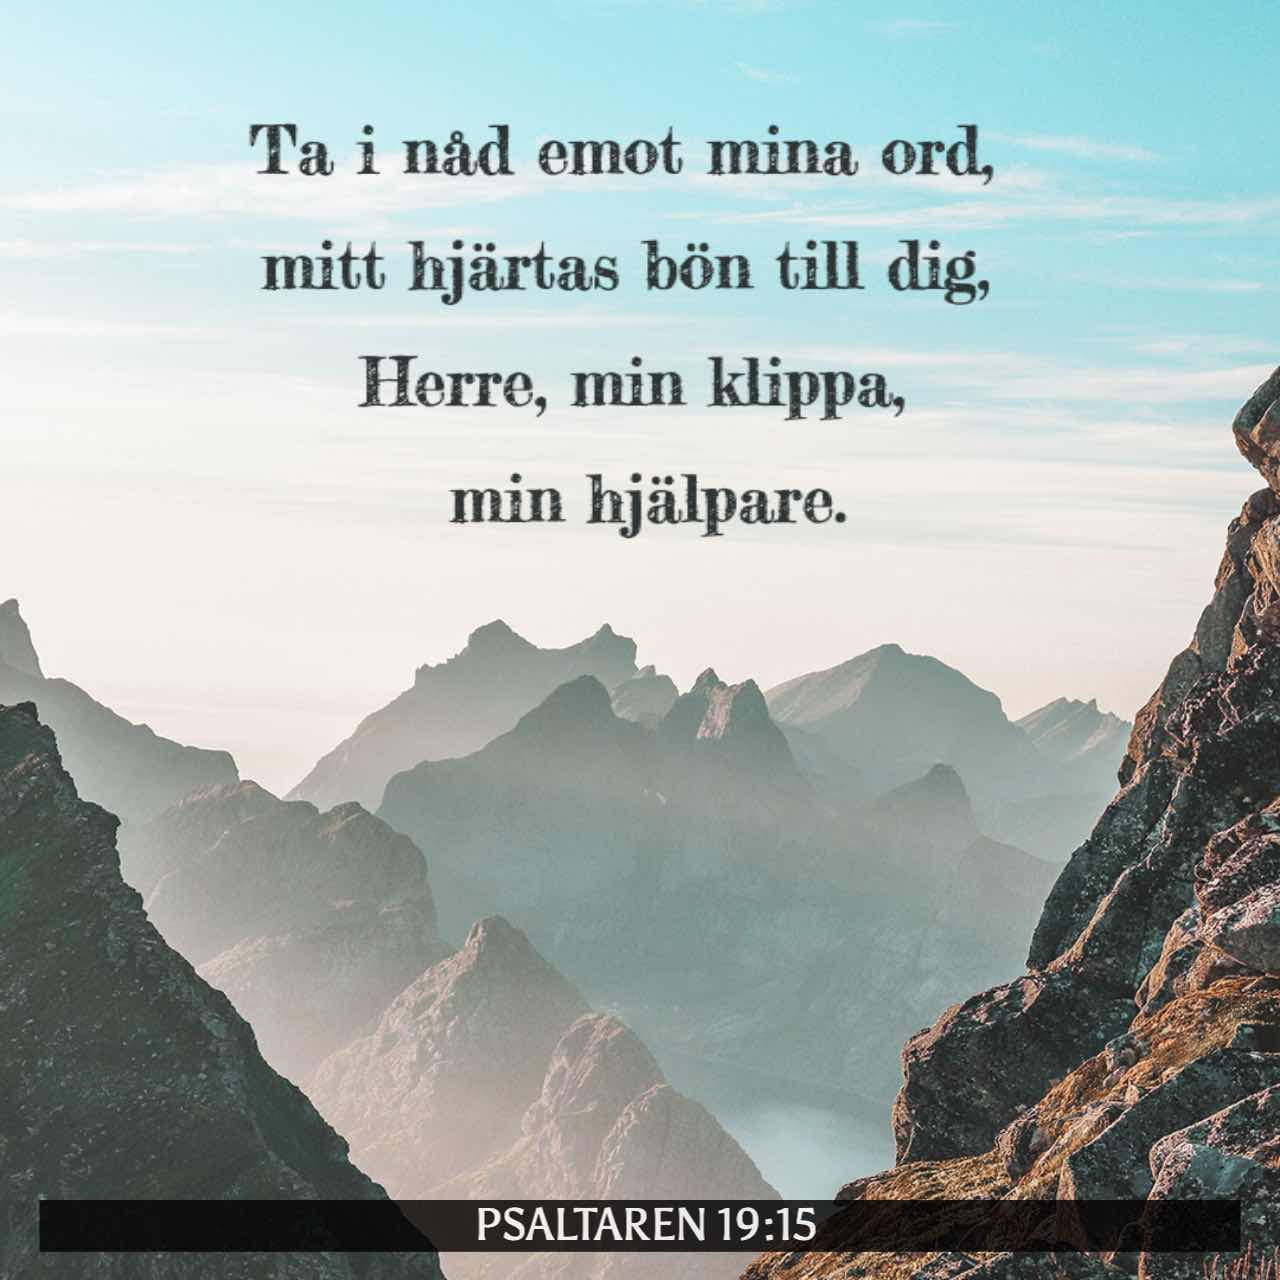 Bible Verse of the Day - day 21 - image 49209 (Psaltaren 19:14)